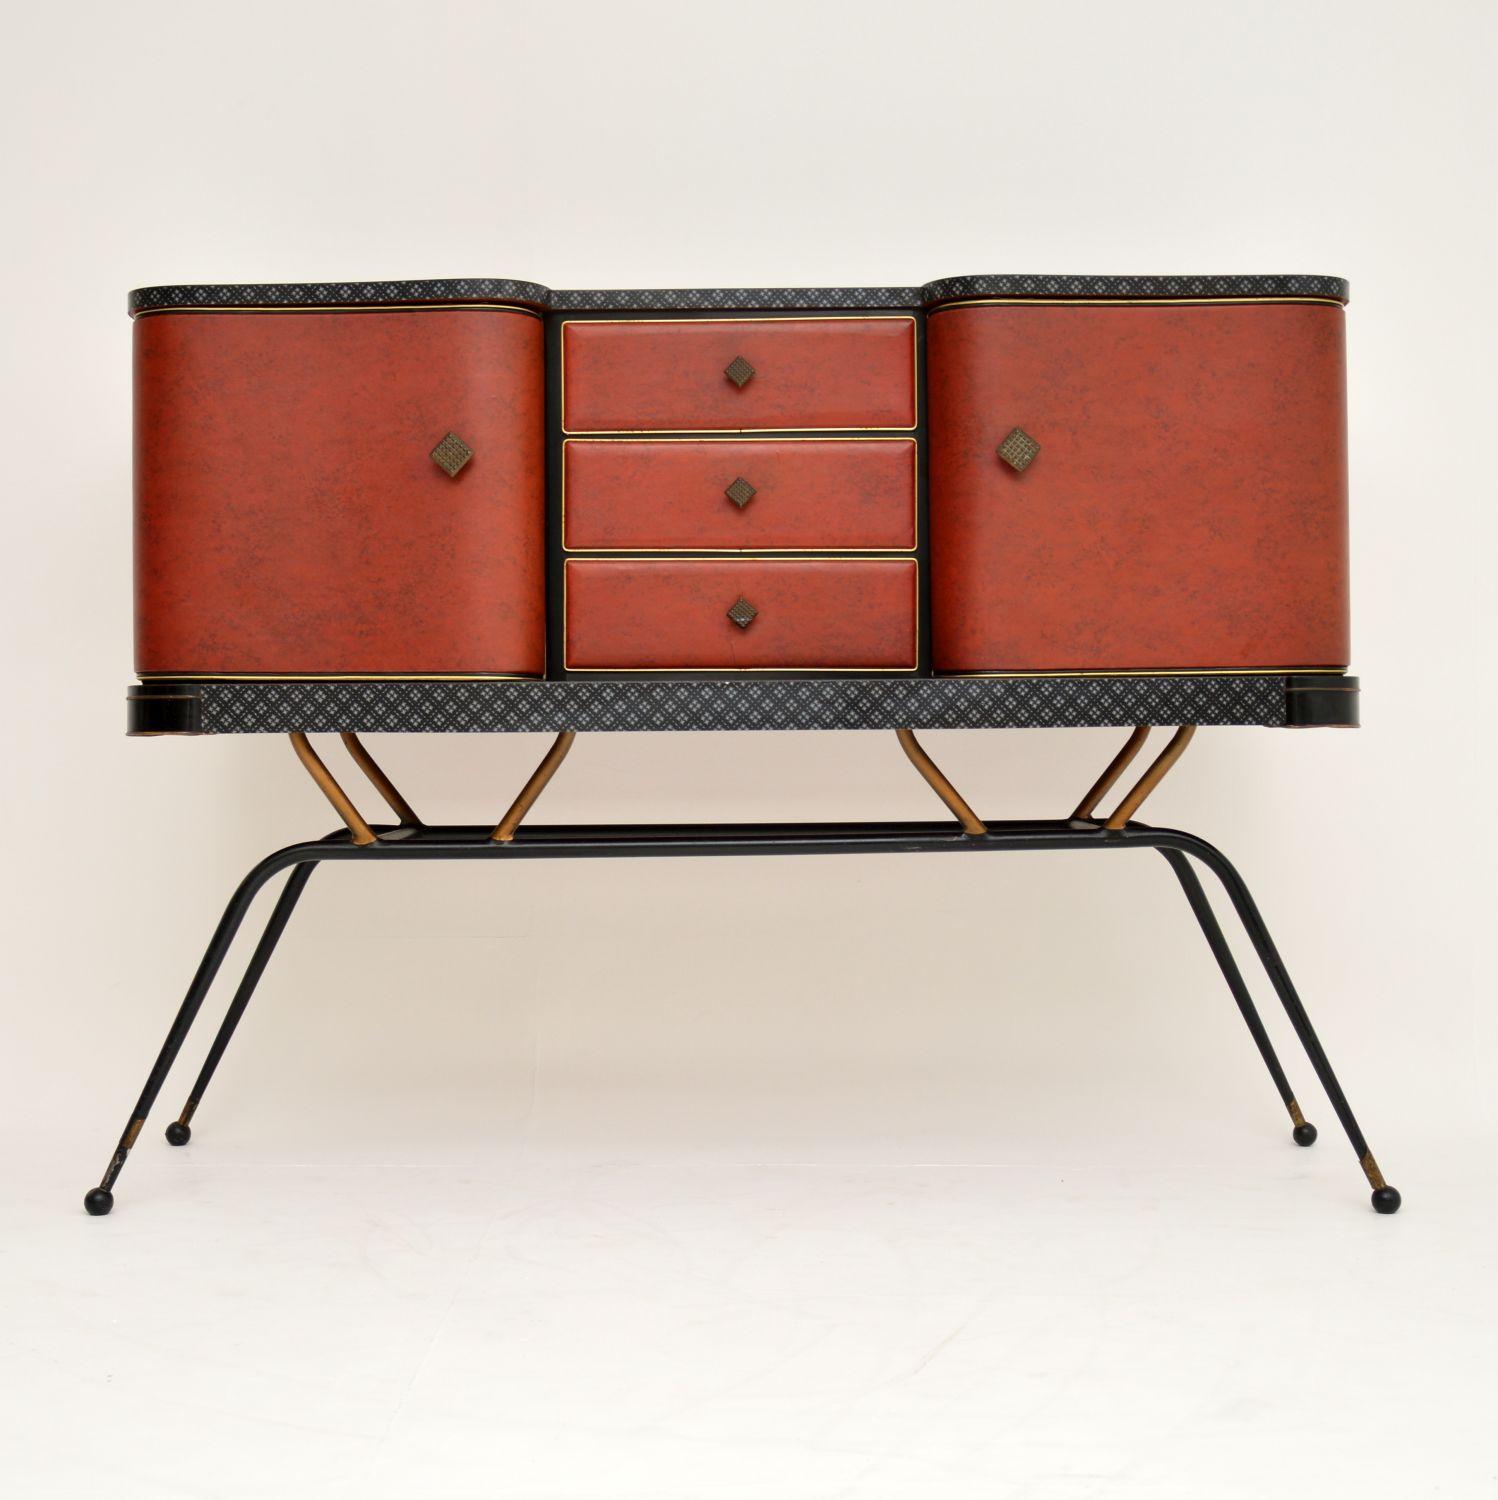 This is a fantastic original 1950s vintage sideboard, with a most unusual and stylish design. Made from an interesting combination of materials, this is of really high quality. The carcass is wood, with a Formica top and red vinyl wrapped